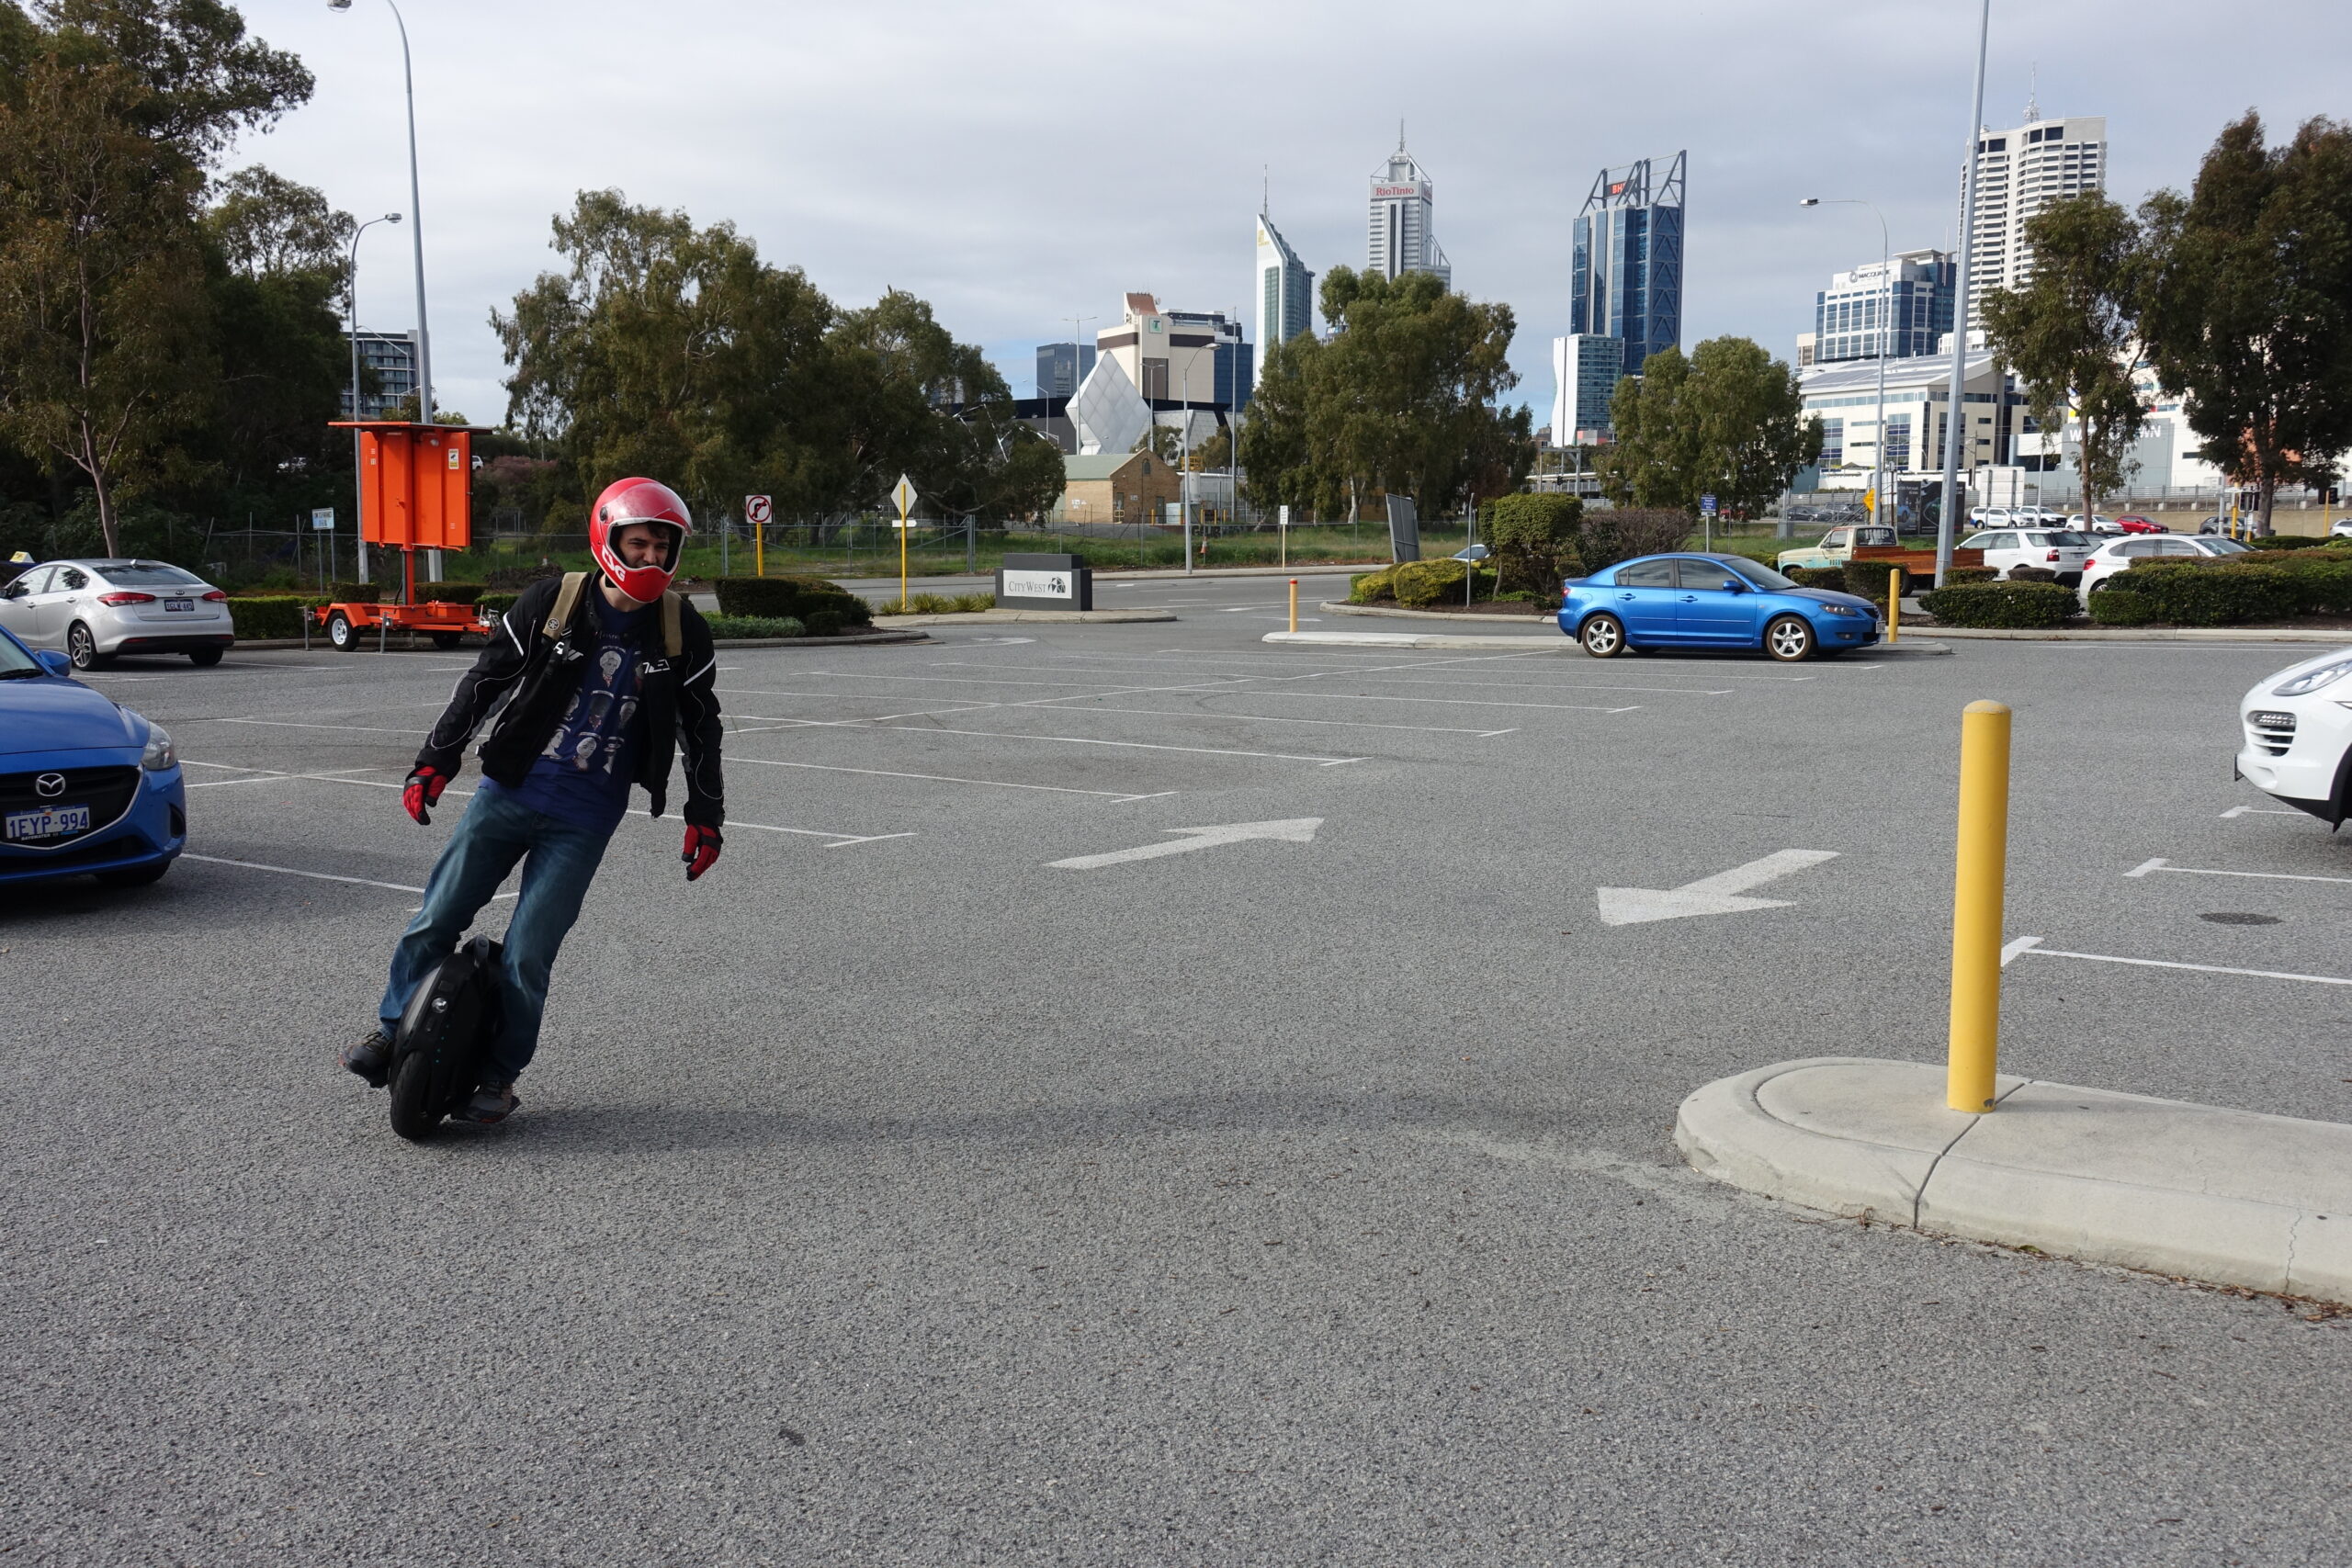 Phil rides an electric unicycle through a carpark outside the Perth CBD